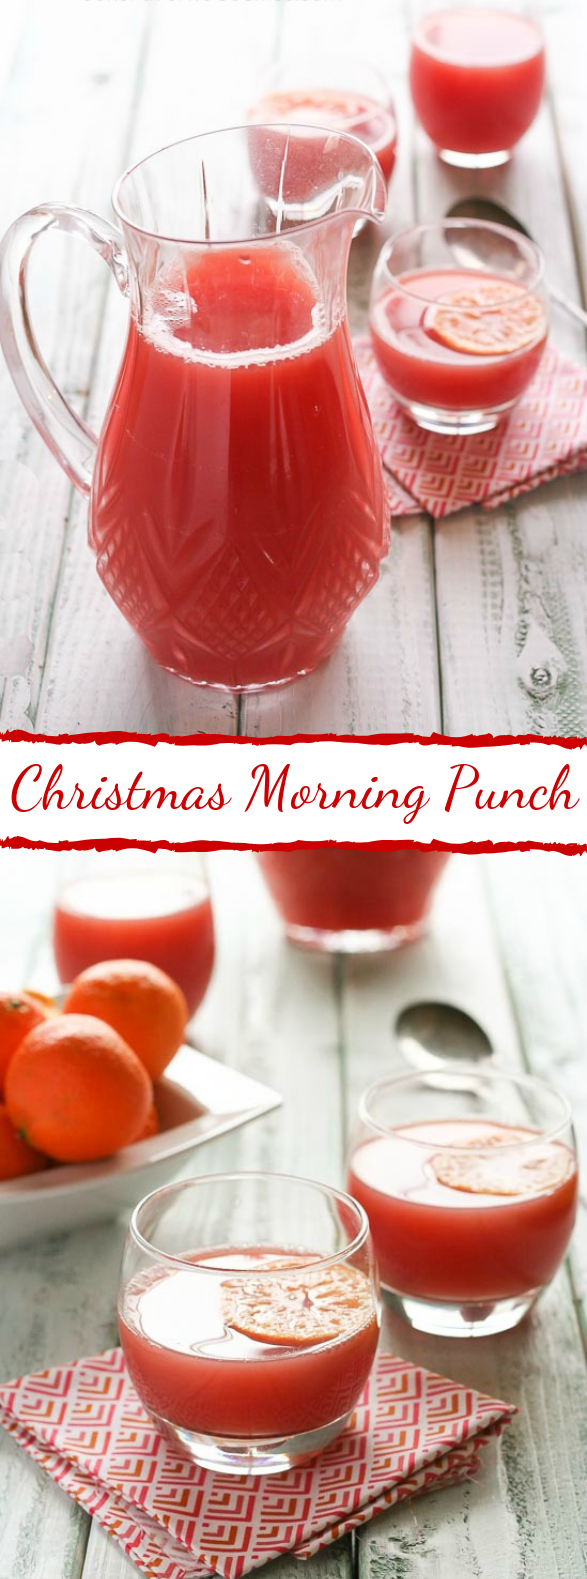 Christmas Morning Punch #partydrink #drinks